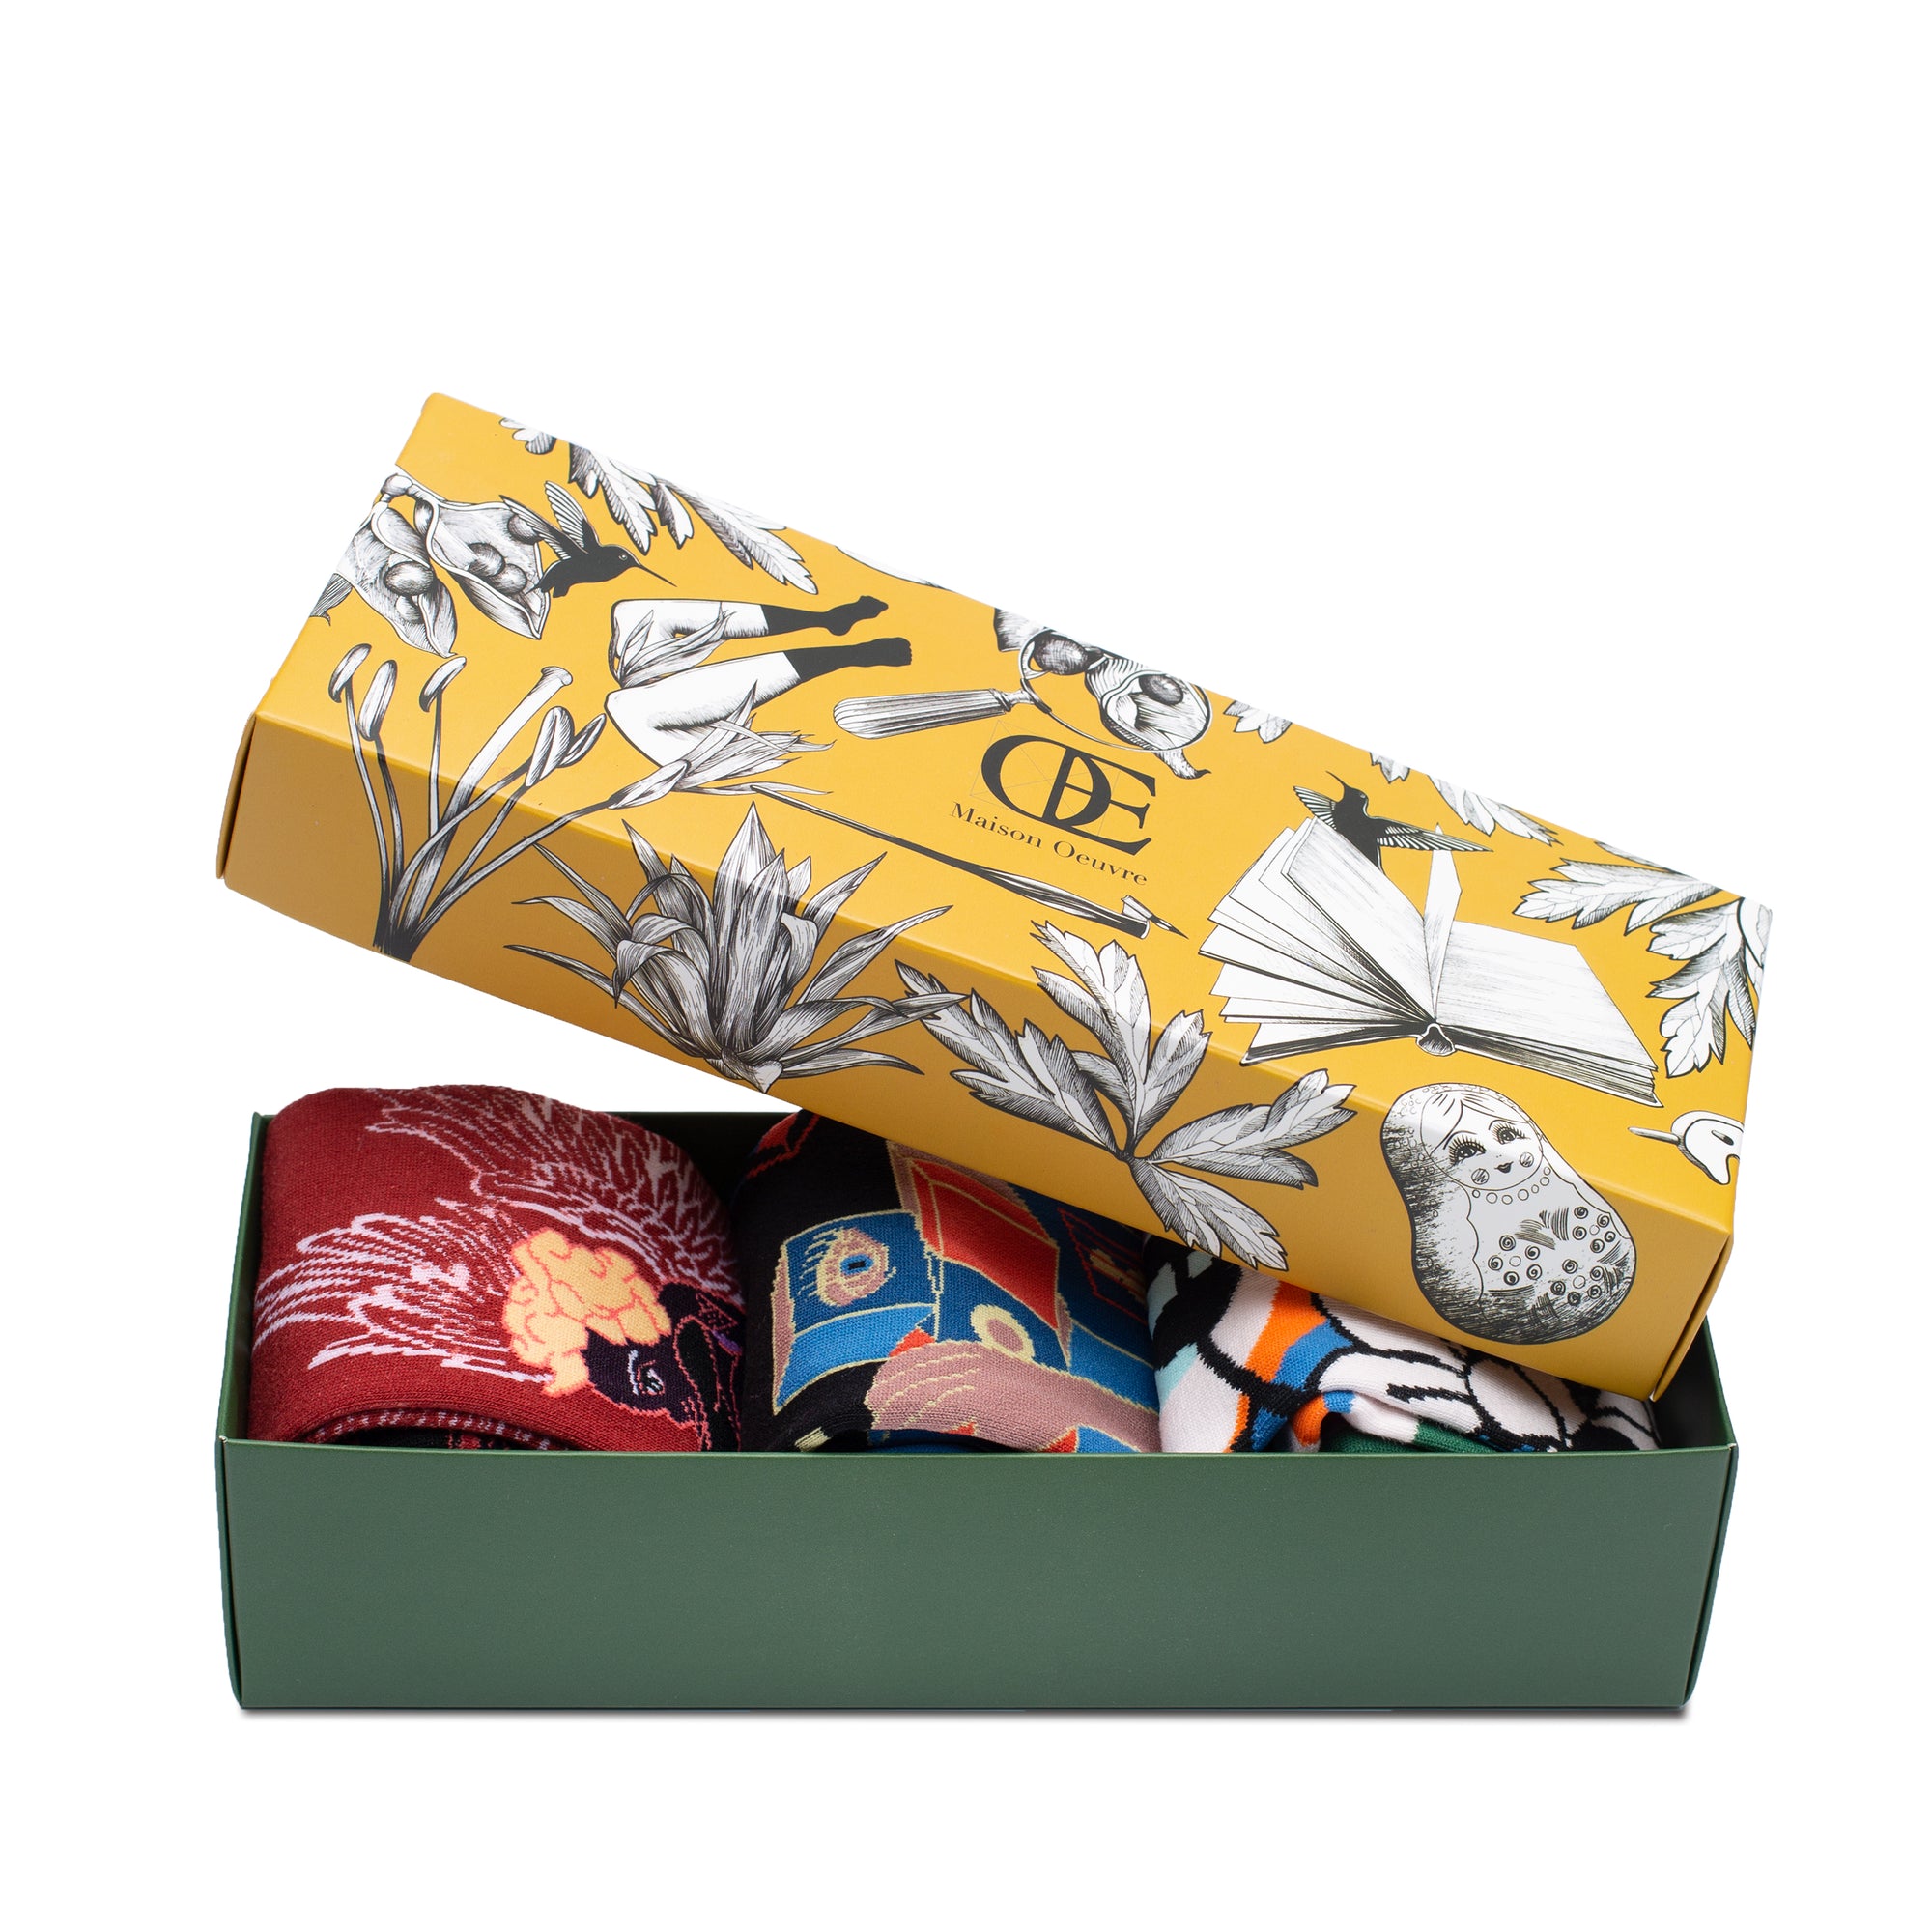 Gallery Socks Gift Box 3-Pack (with 3 originally designed postcards)